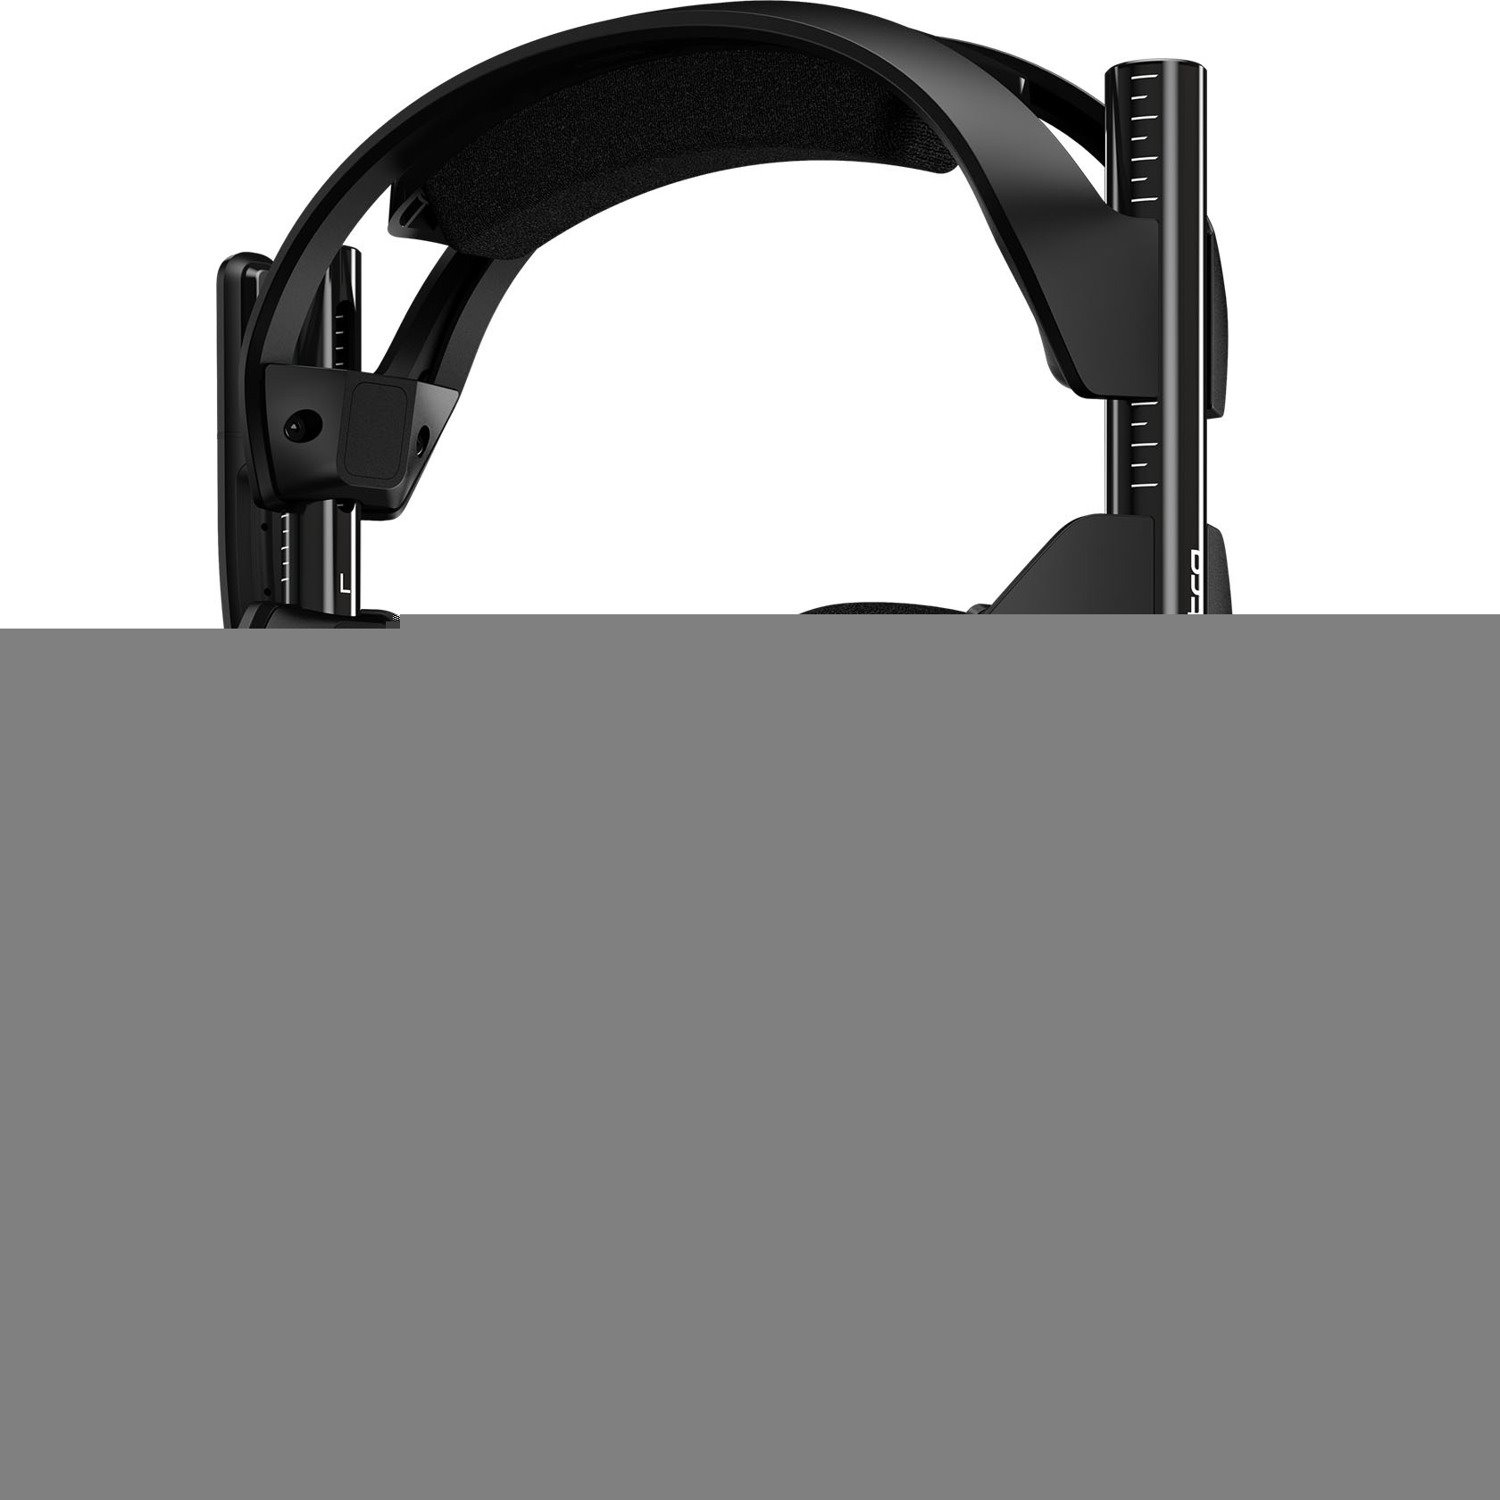 Astro A50 Wireless Over-the-head Stereo Gaming Headset - Black